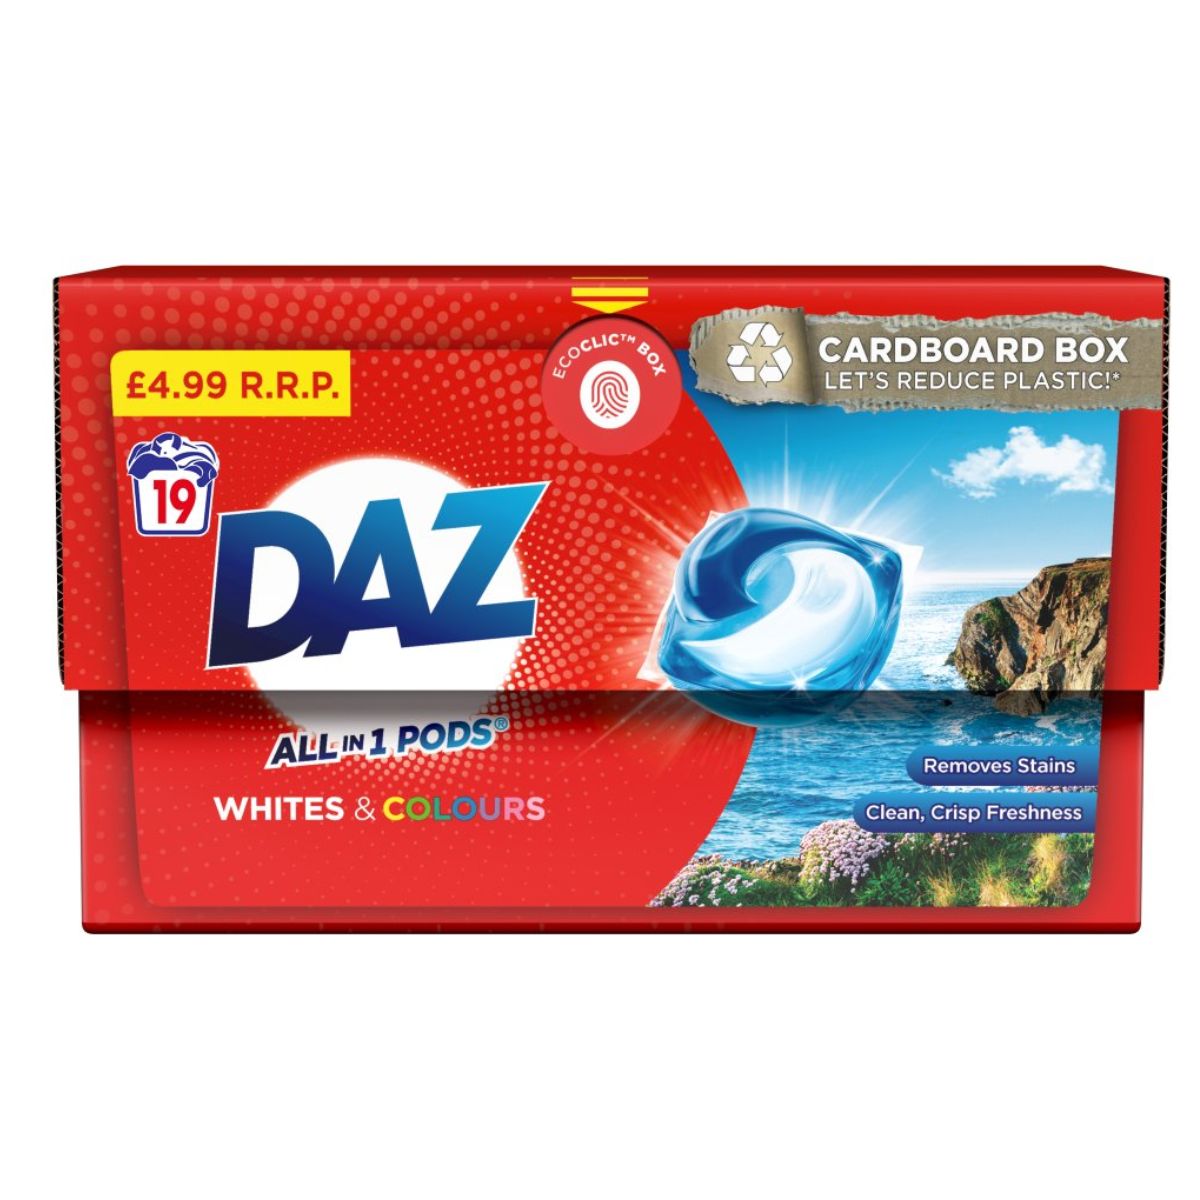 A box of Daz - All-in-1 Pods Washing Liquid Capsules - 19 Washes laundry detergent for whites and colors with pricing and environmental packaging information.